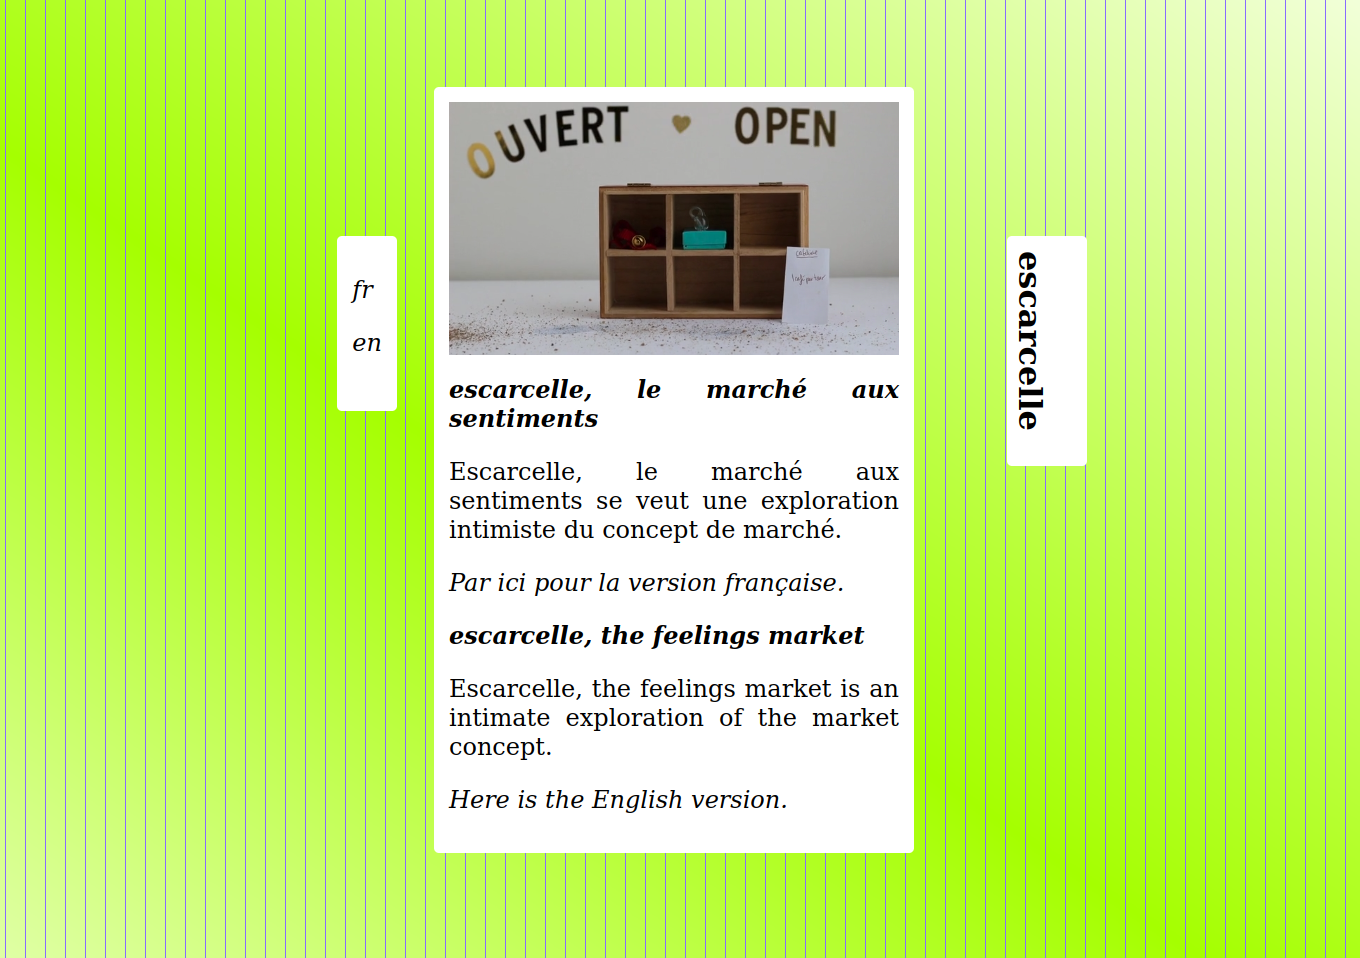 the landing page of escarcelle